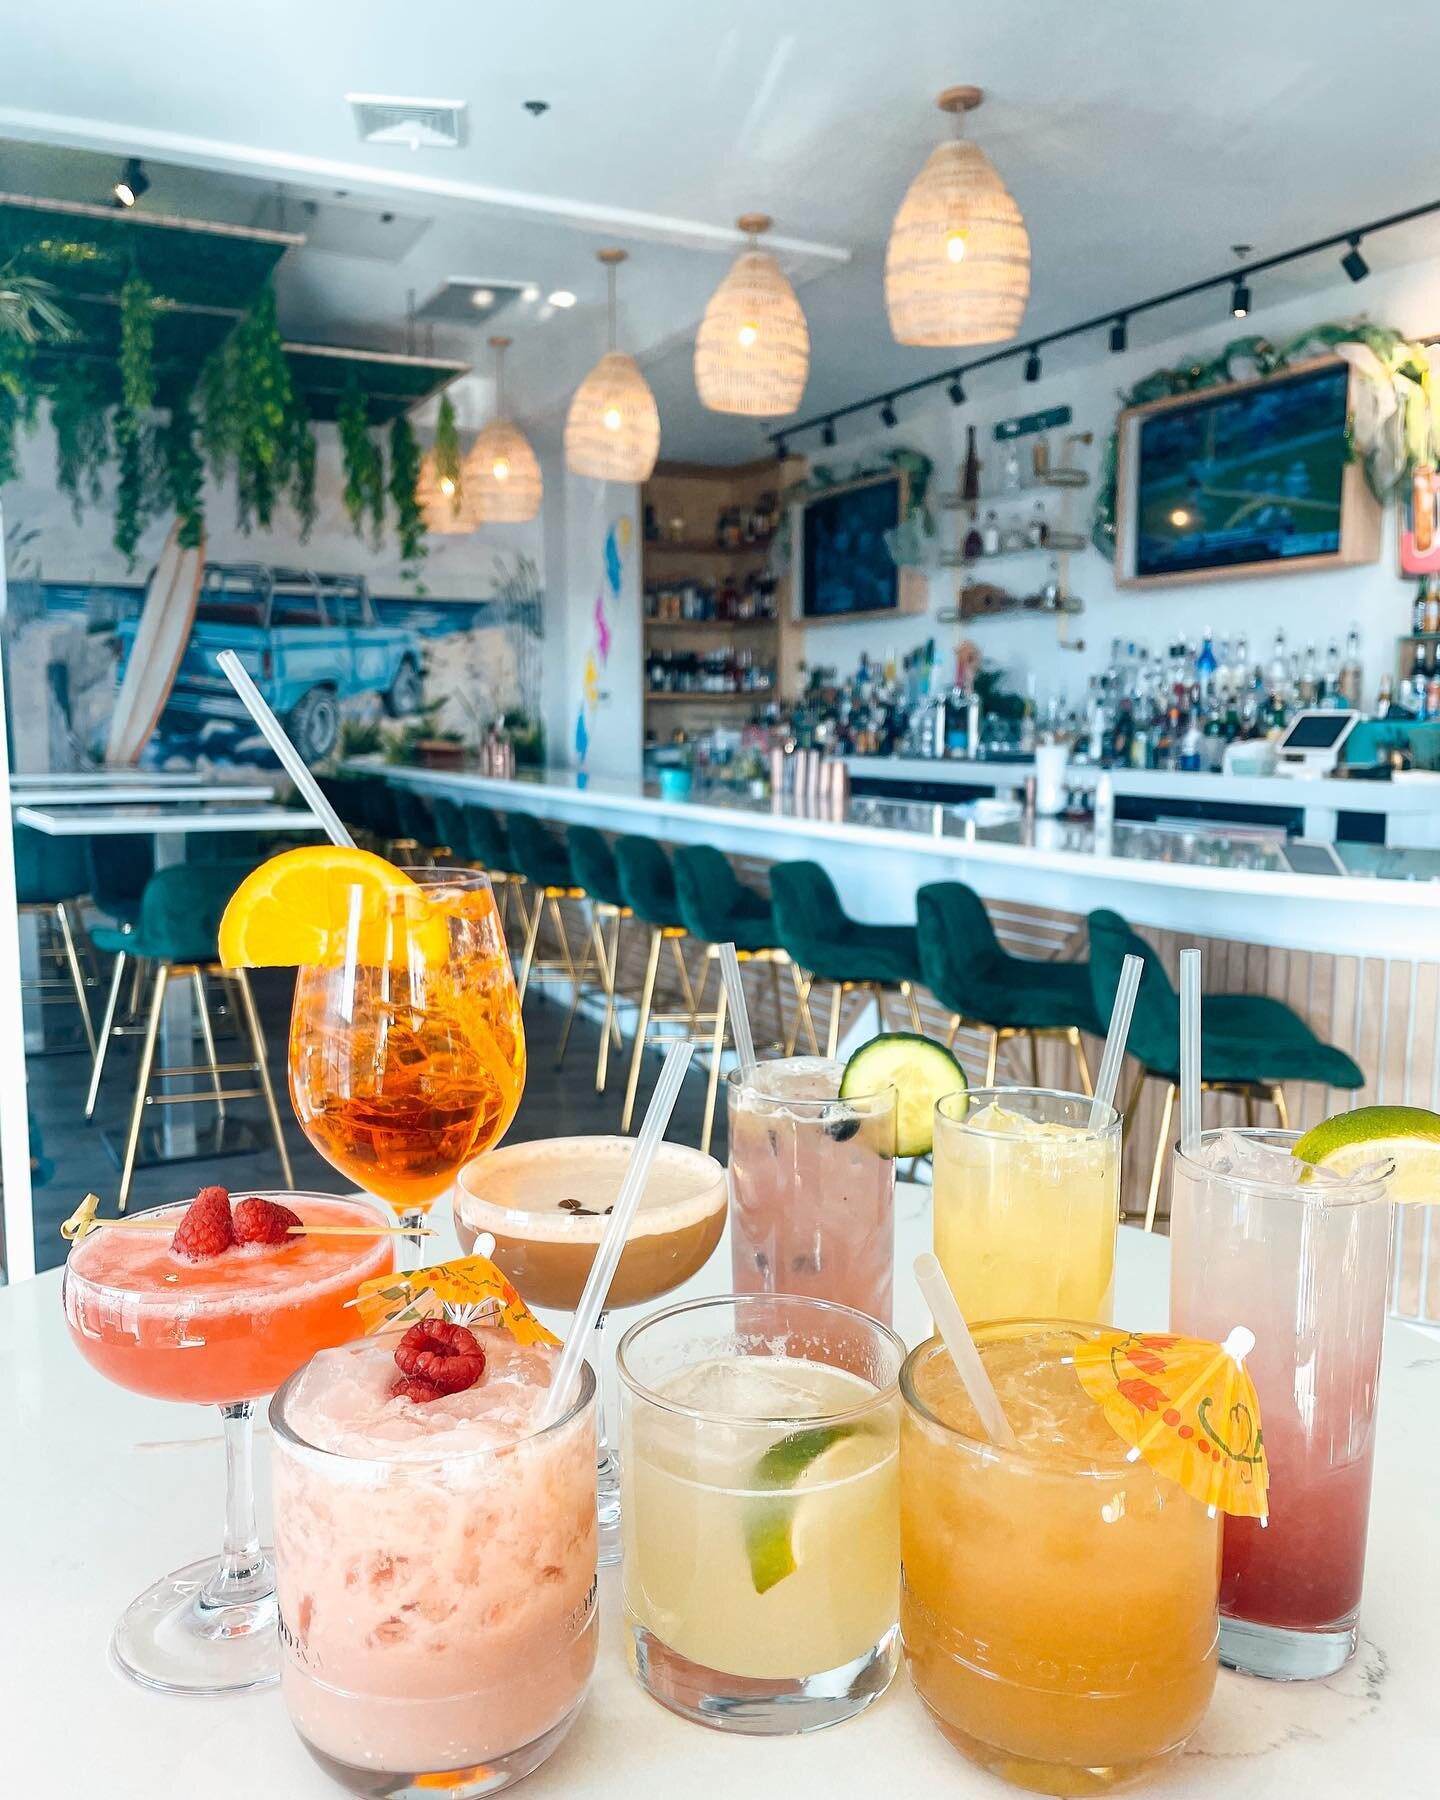 Happy Friday to all you thirsty tomatoes 🍅 
Every day there seems to be a &ldquo;national something day&rdquo;, but today we hear is National Cocktail Day 🍹 and that&rsquo;s a day we do well down here at the island. Let&rsquo;s ride!